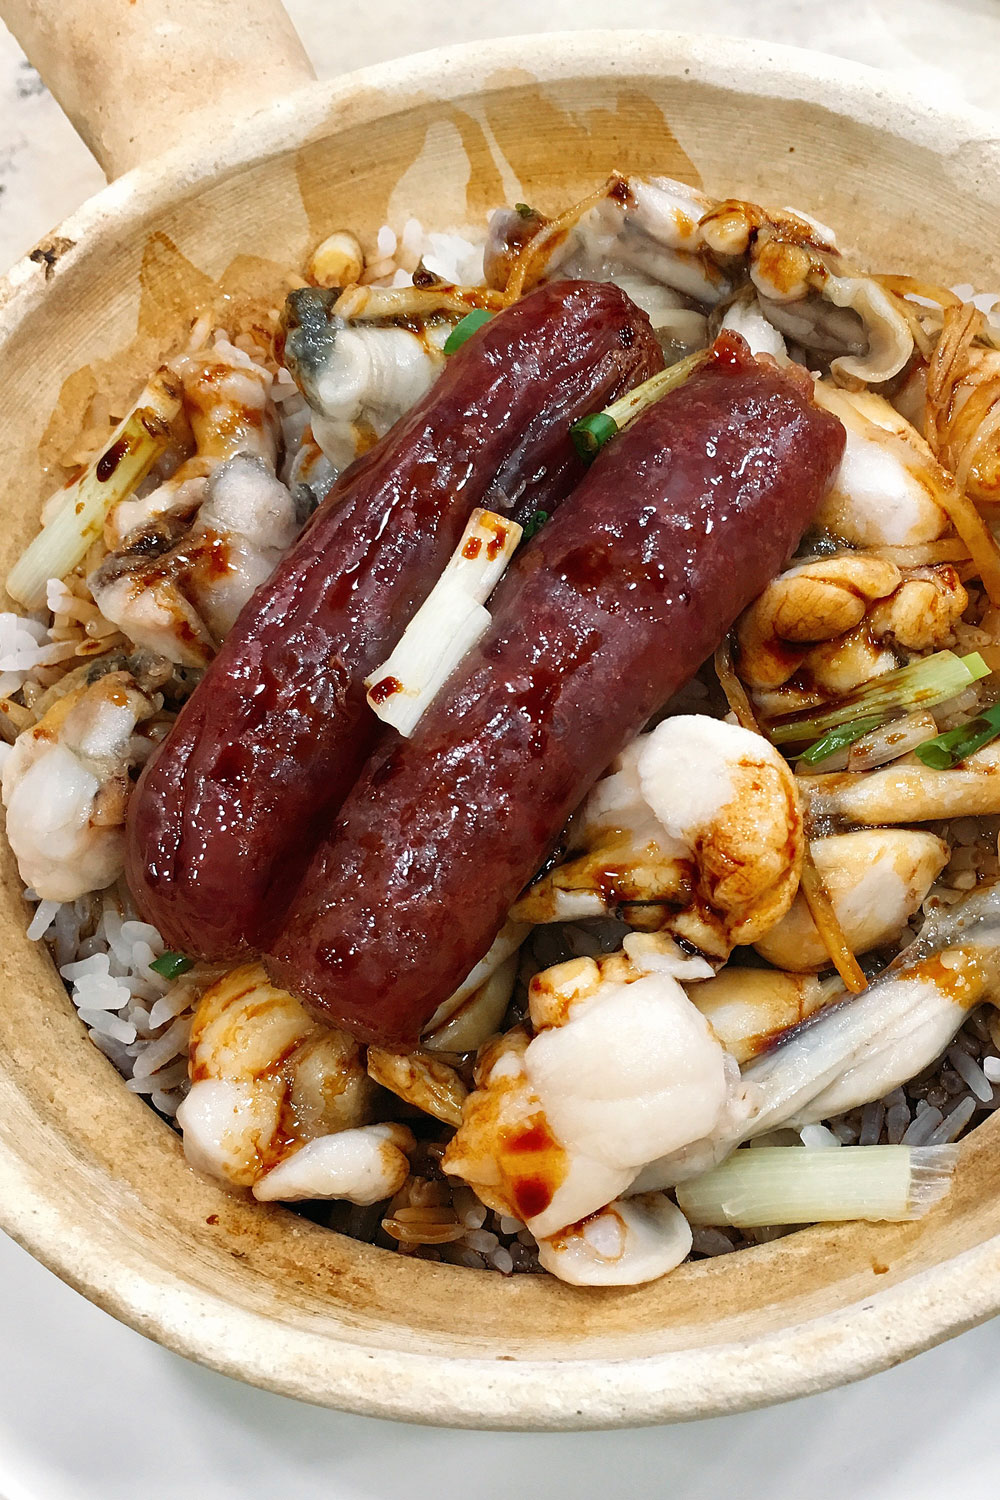 Claypot rice with rice veggies and meat in Hong Kong.